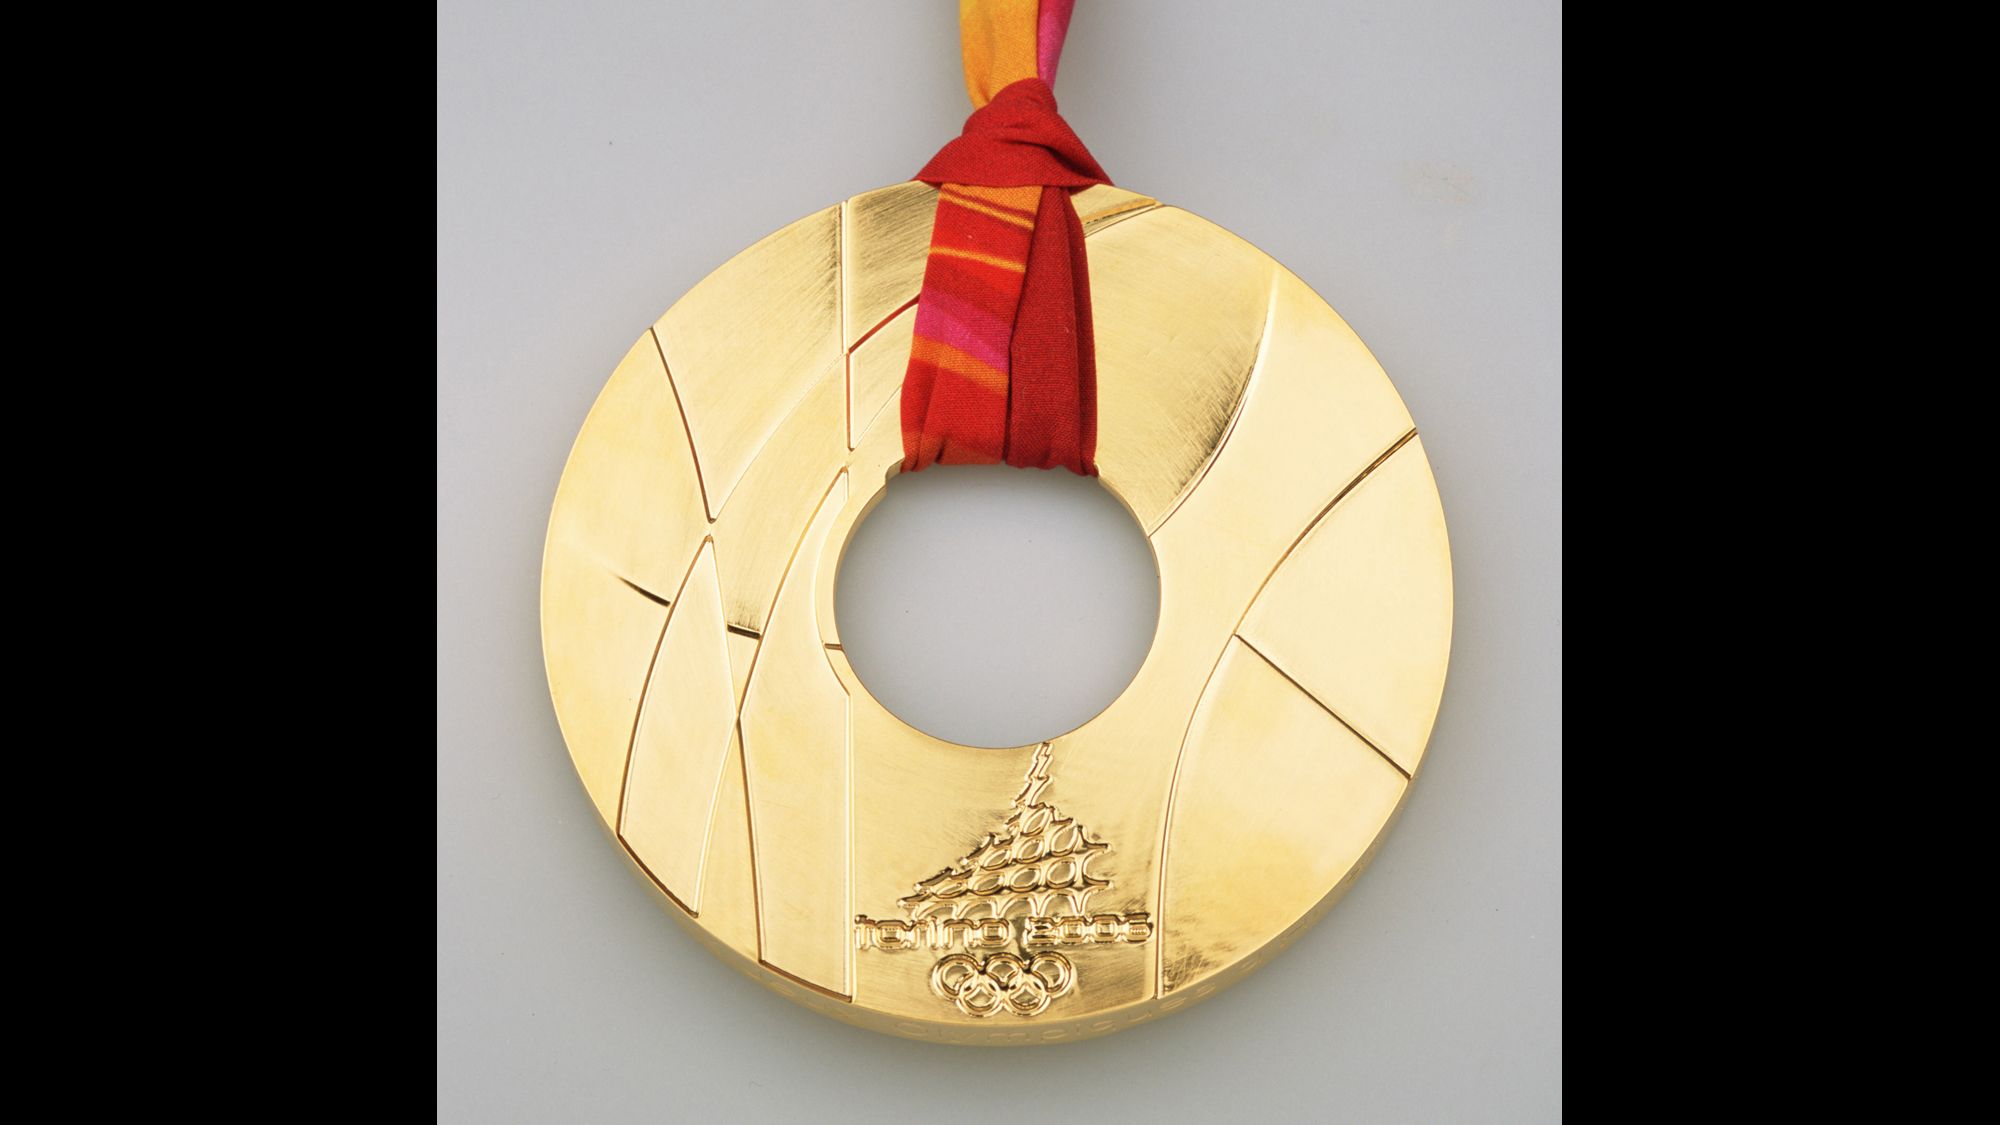 olympic medals png